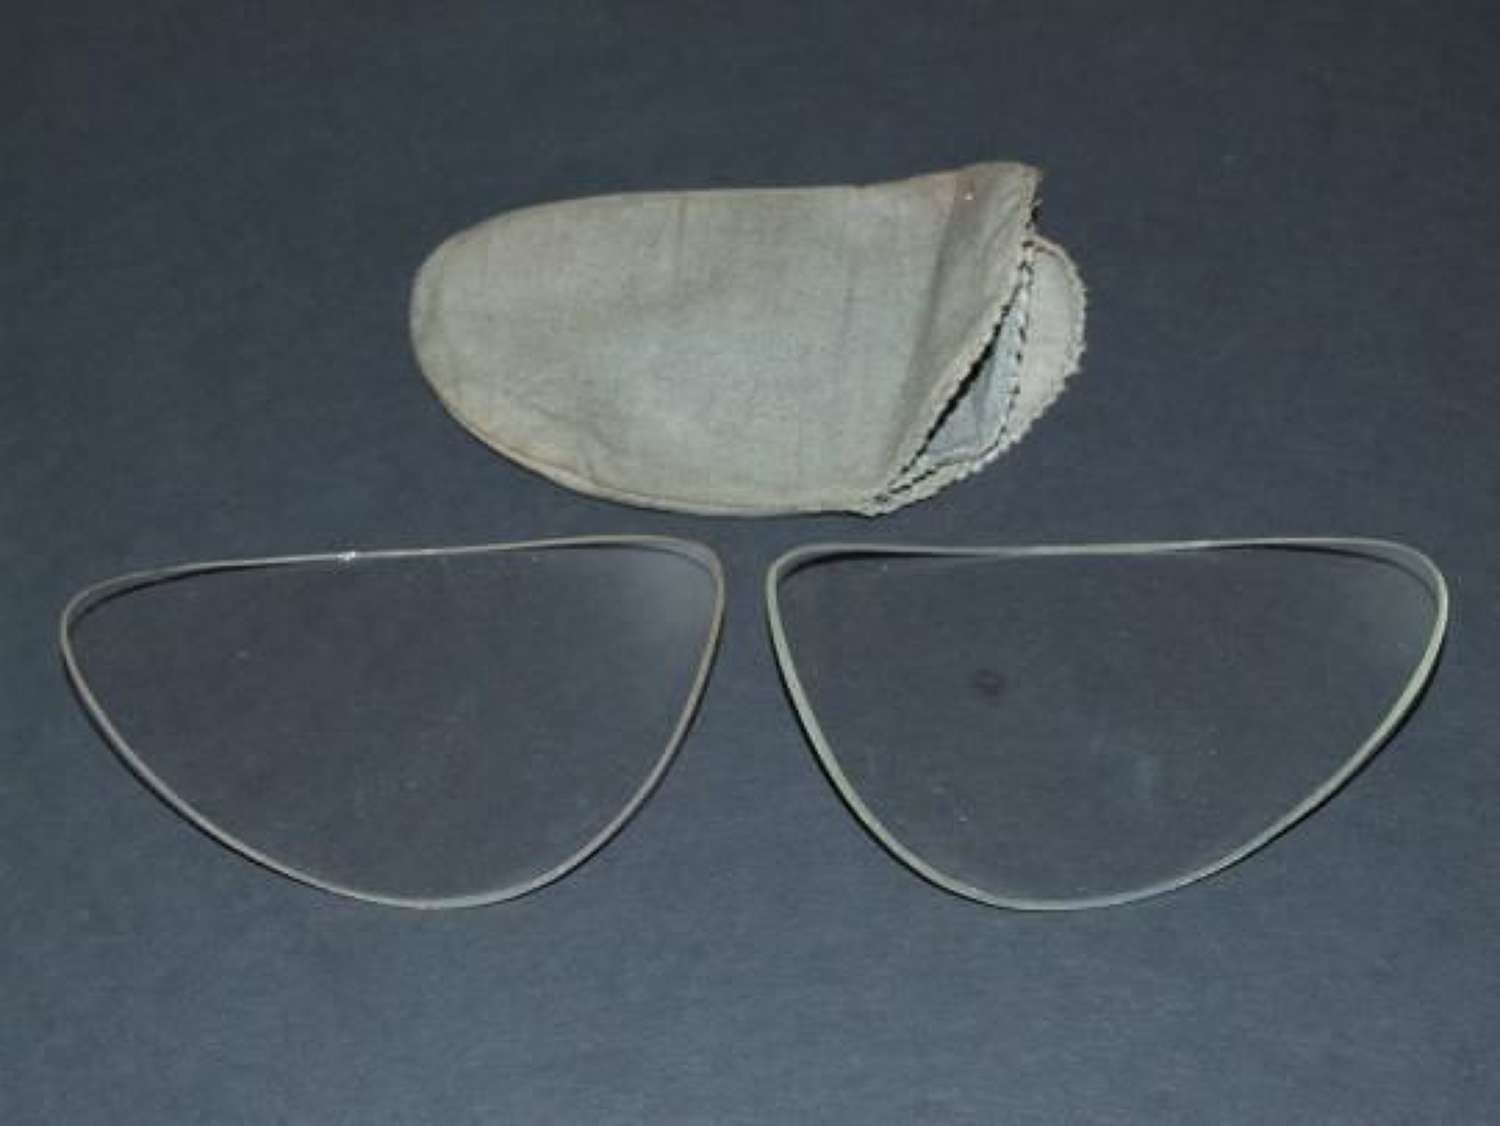 Replacement Lenses for the Luftwaffe 306 Goggles